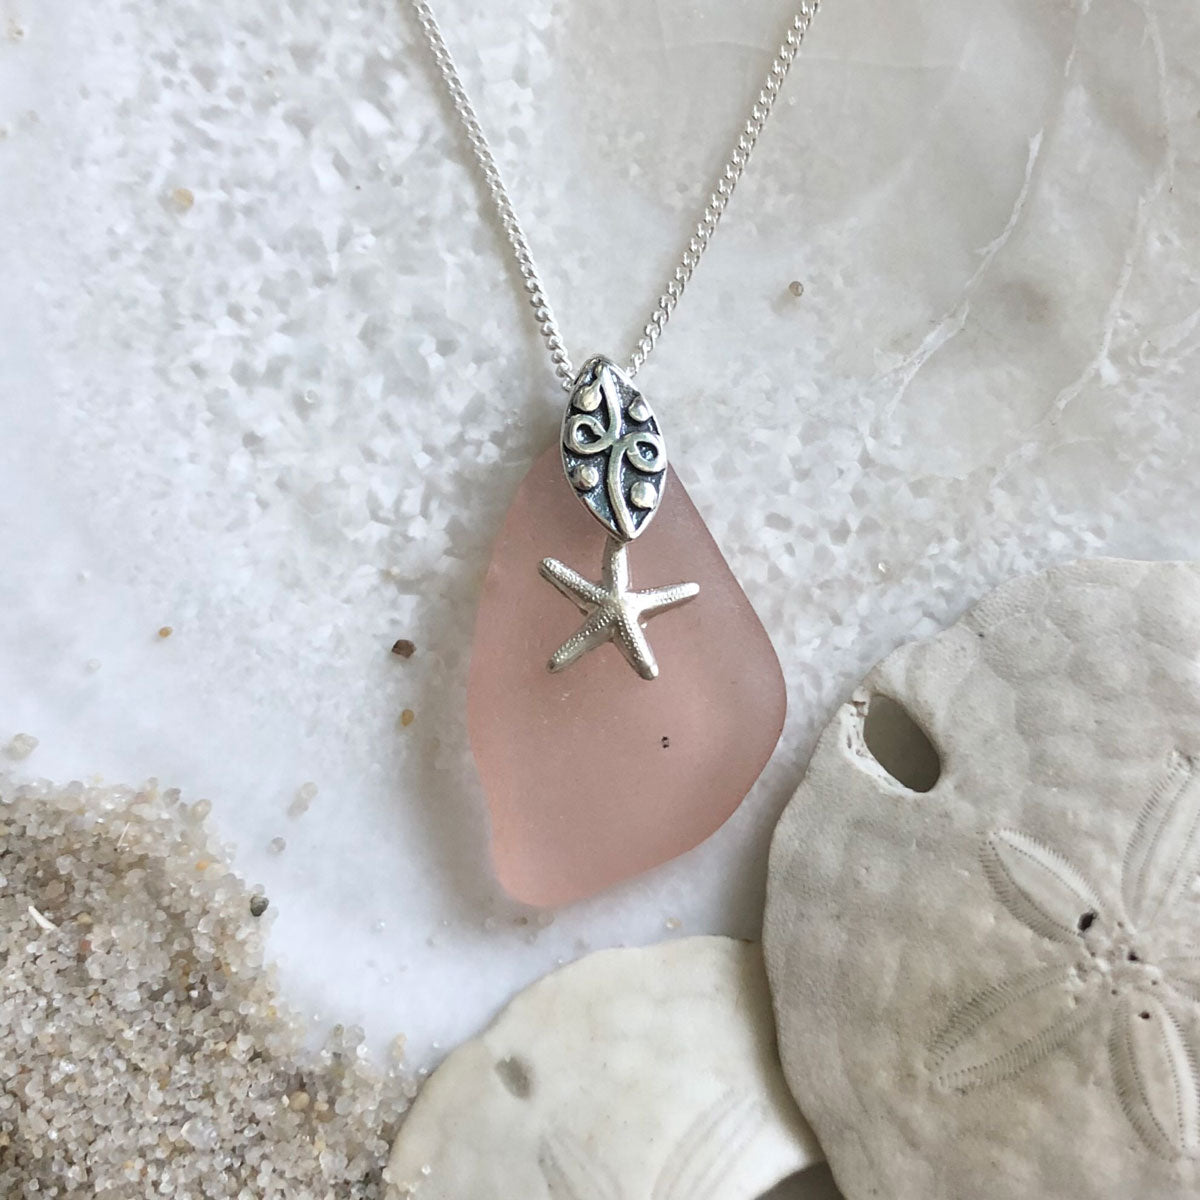 Pink Sea Glass Necklace with Sterling Silver Starfish